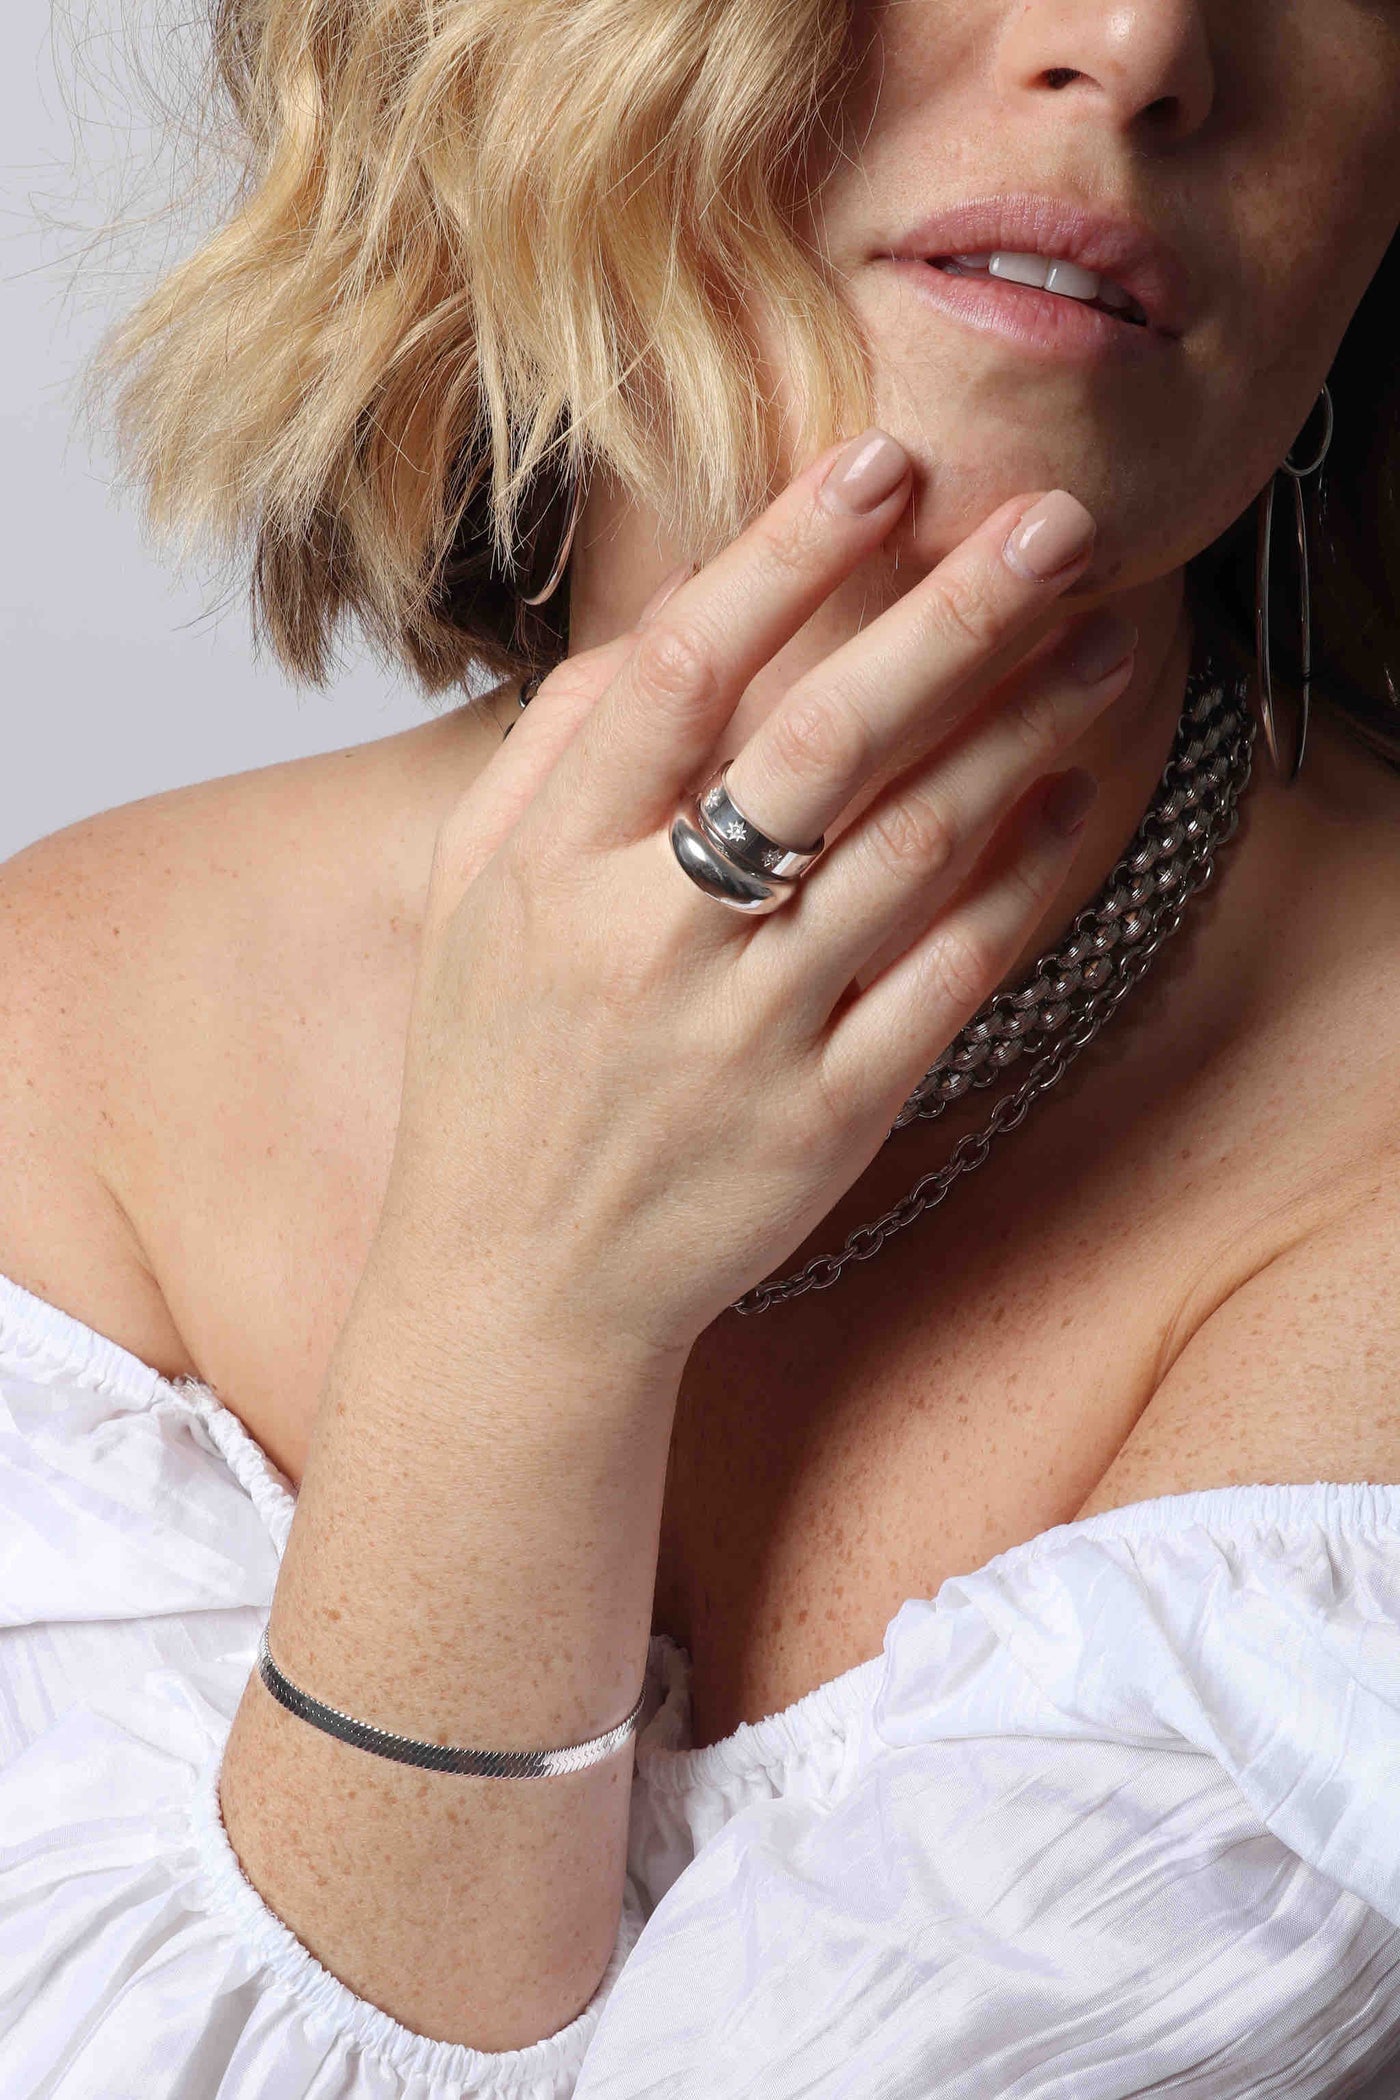 Stacked silver by Marrin Costello Jewelry, including a large 3" double hoop earring, woven textured Lattice XL chain link choker, a smooth polished oval link Mica Chain necklace, dome ring, celestial Cartier inspired ring, and 5mm herringbone Ramsey Bracelet, paired with a white pleated off the shoulder top from Show Me Your Mumu 